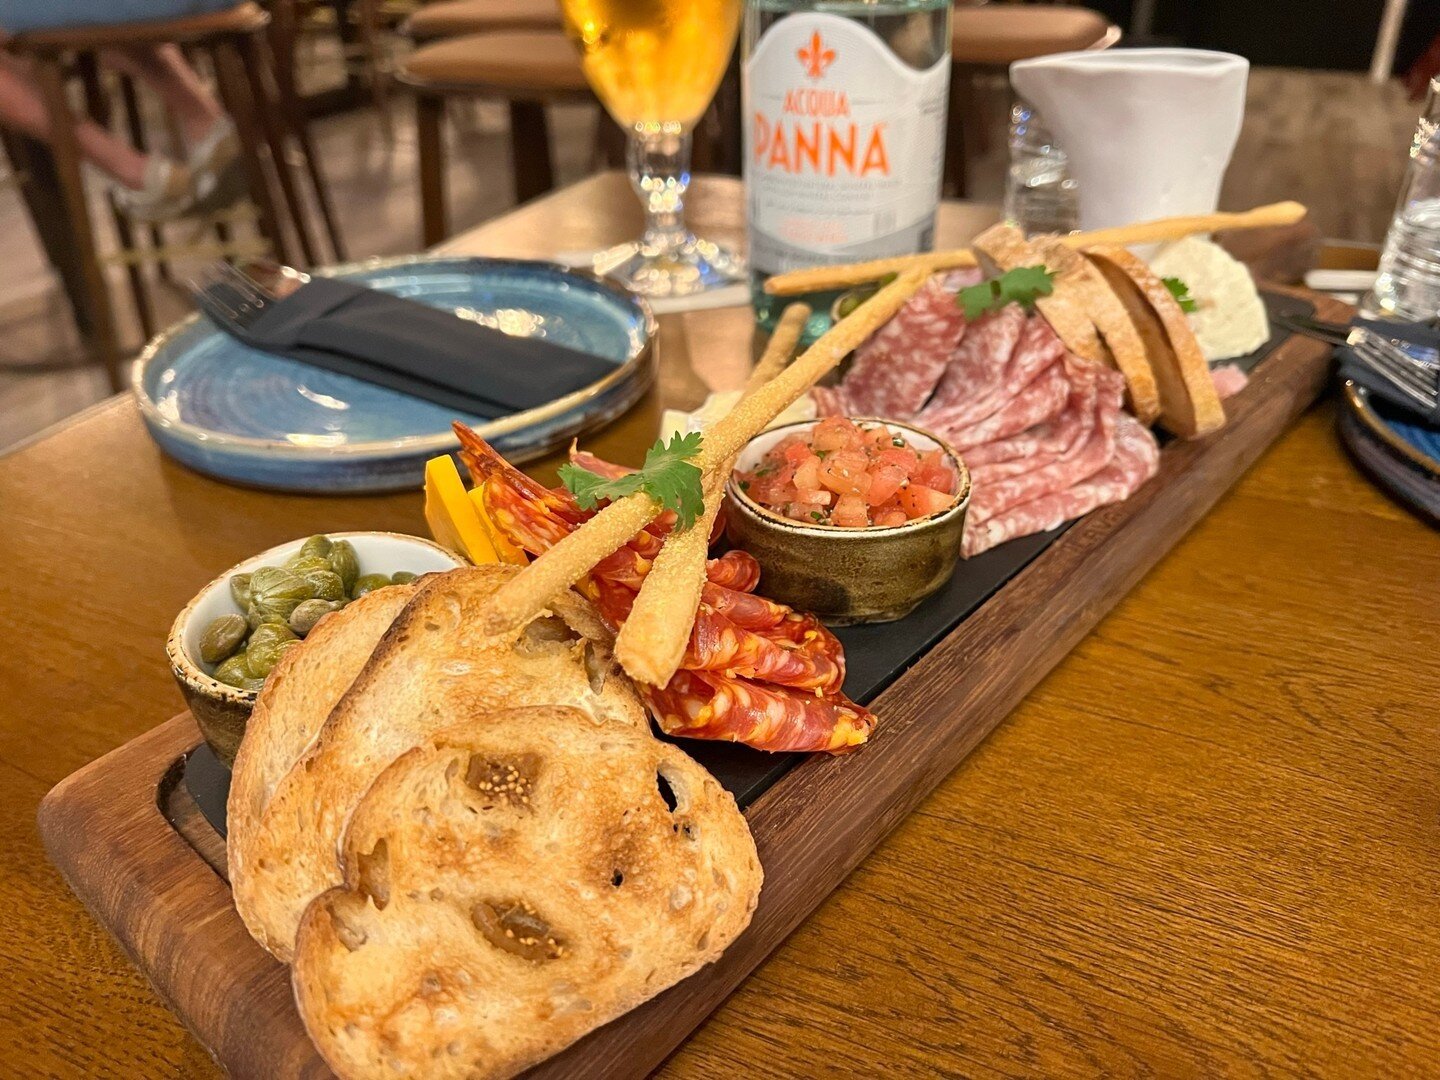 Afternoon to nighttime rendezvous @fivejumeirahvillage and Goosey! #gooseislandtaphouse ⁠
⁠
What's on the Fork:⁠
⁠
Charcuterie Selection of cold cuts, cheese, pickles, crackers and meat of your choice. #platters #foodies